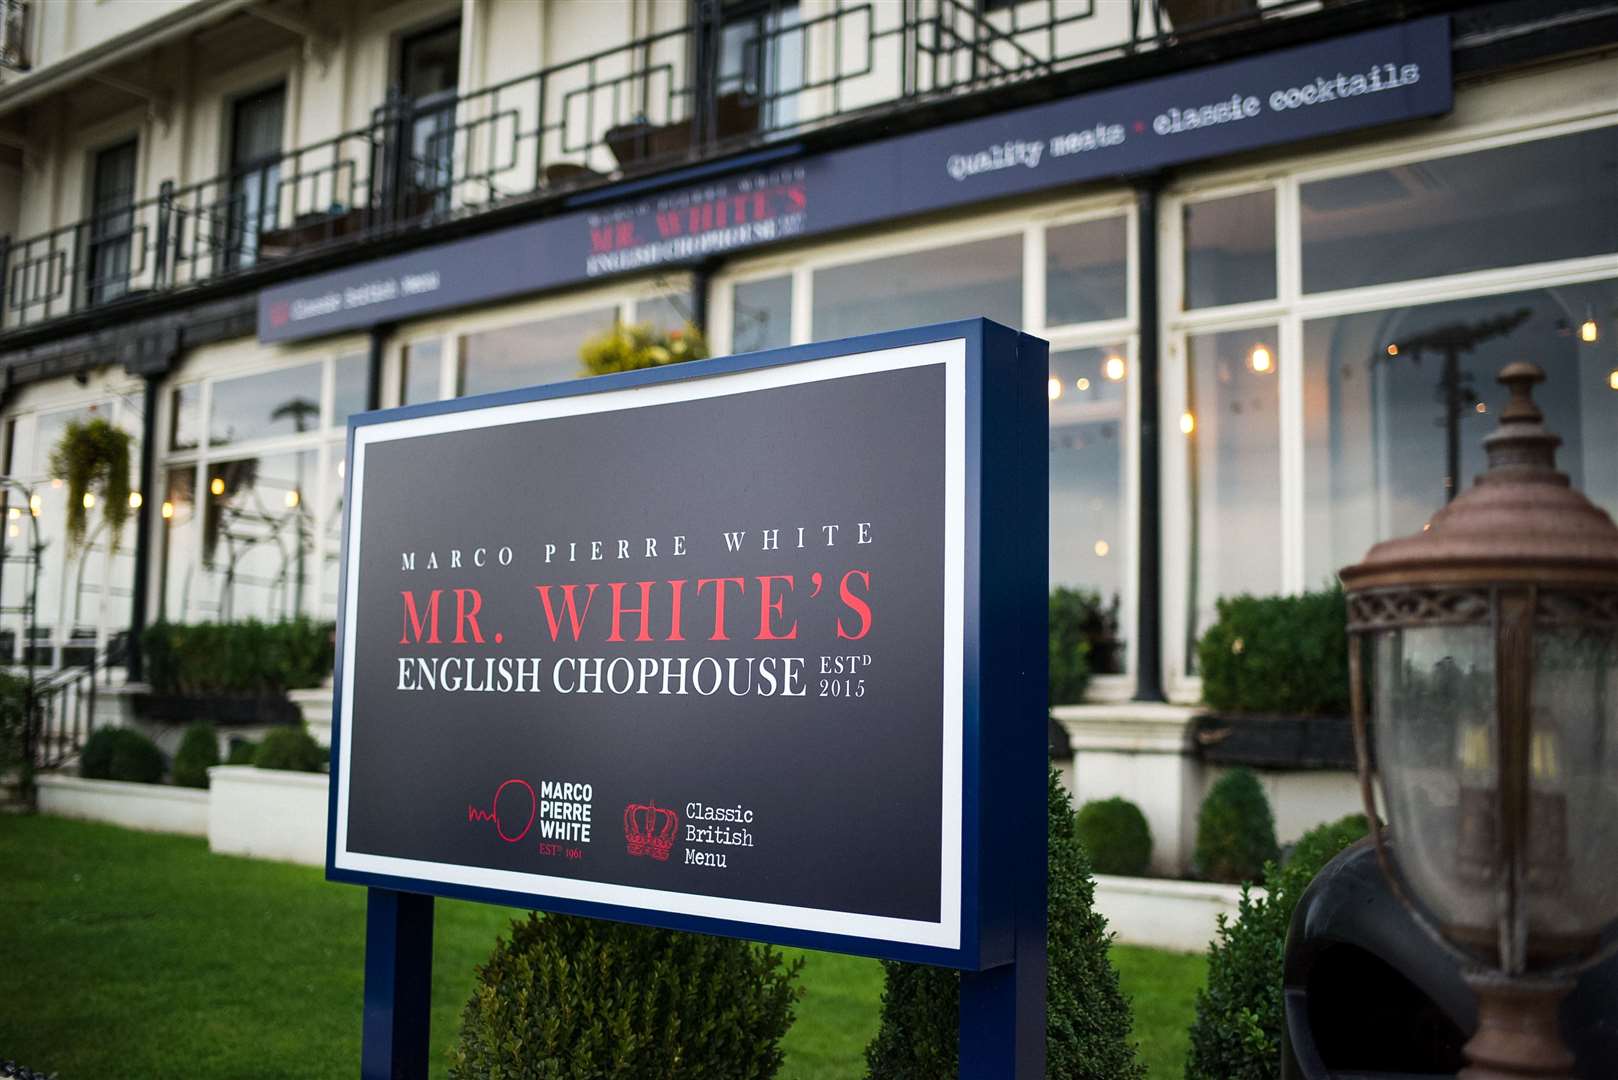 Mr White’s English Chophouse is opening its doors again completely